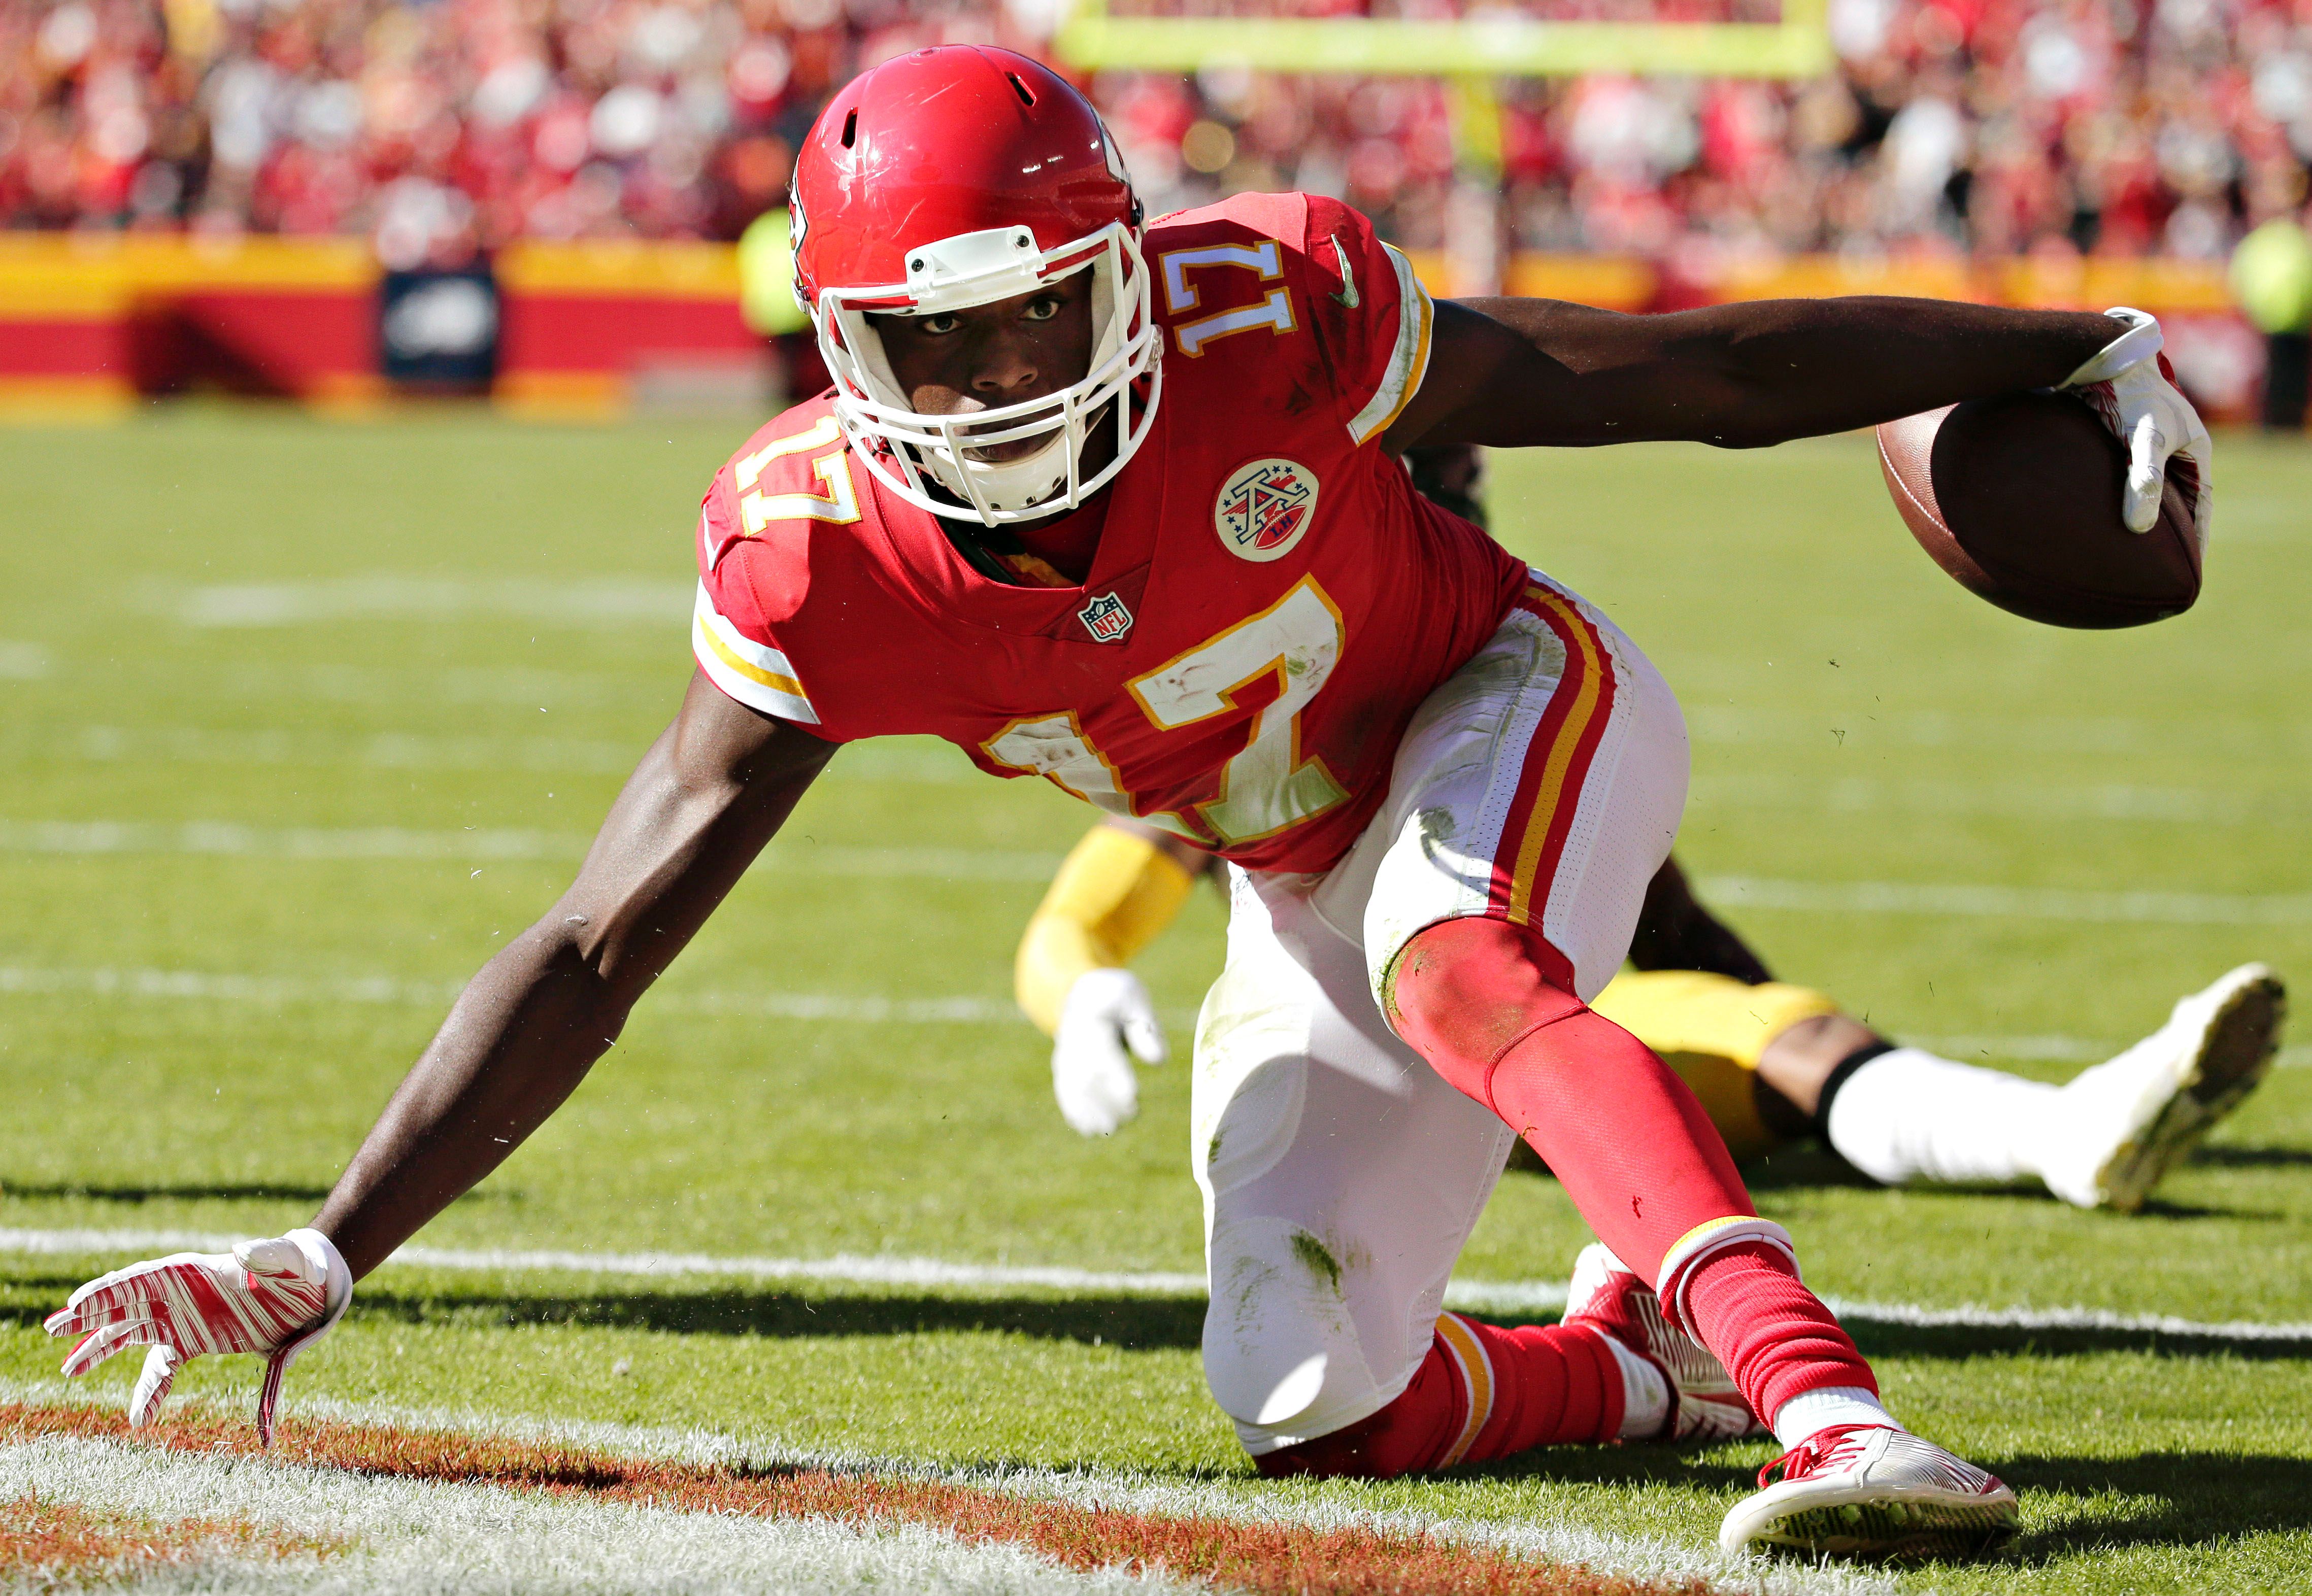 At 24, Chris Conley assumes responsibility of leading Chiefs' WRs ESPN